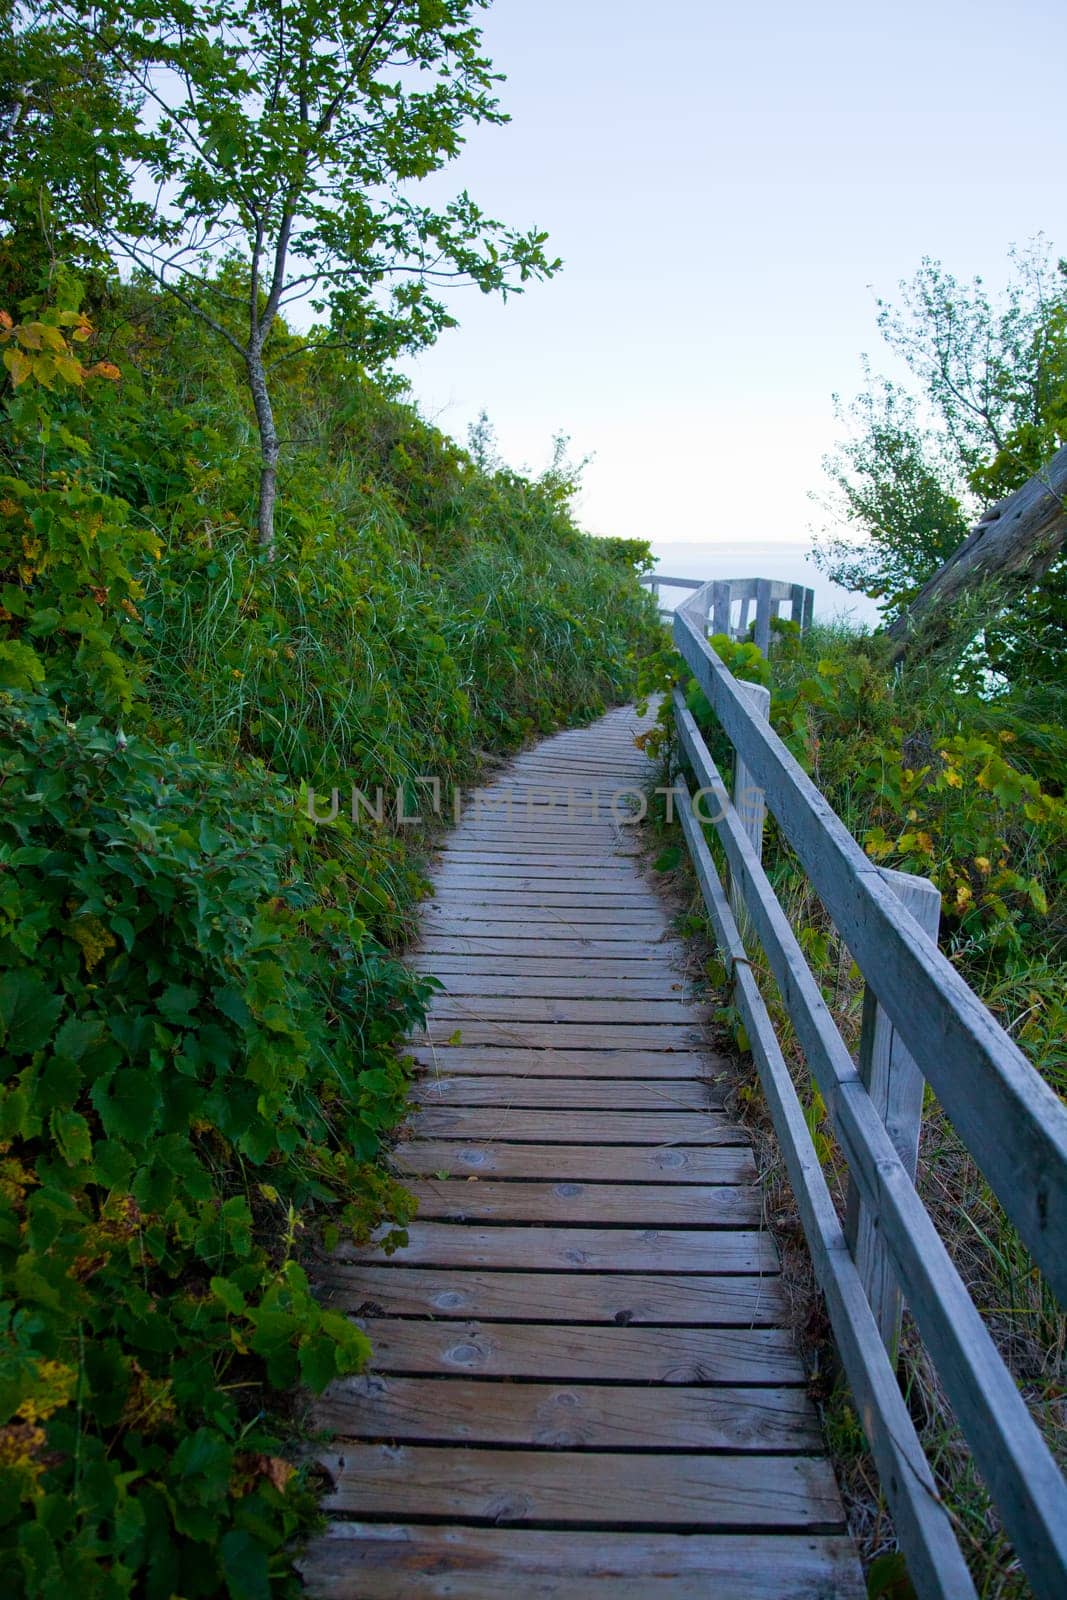 Tranquil wooden boardwalk winding through lush greenery amidst a coastal oasis in Empire, Michigan. Perfect for wanderers and nature enthusiasts seeking a peaceful escape.